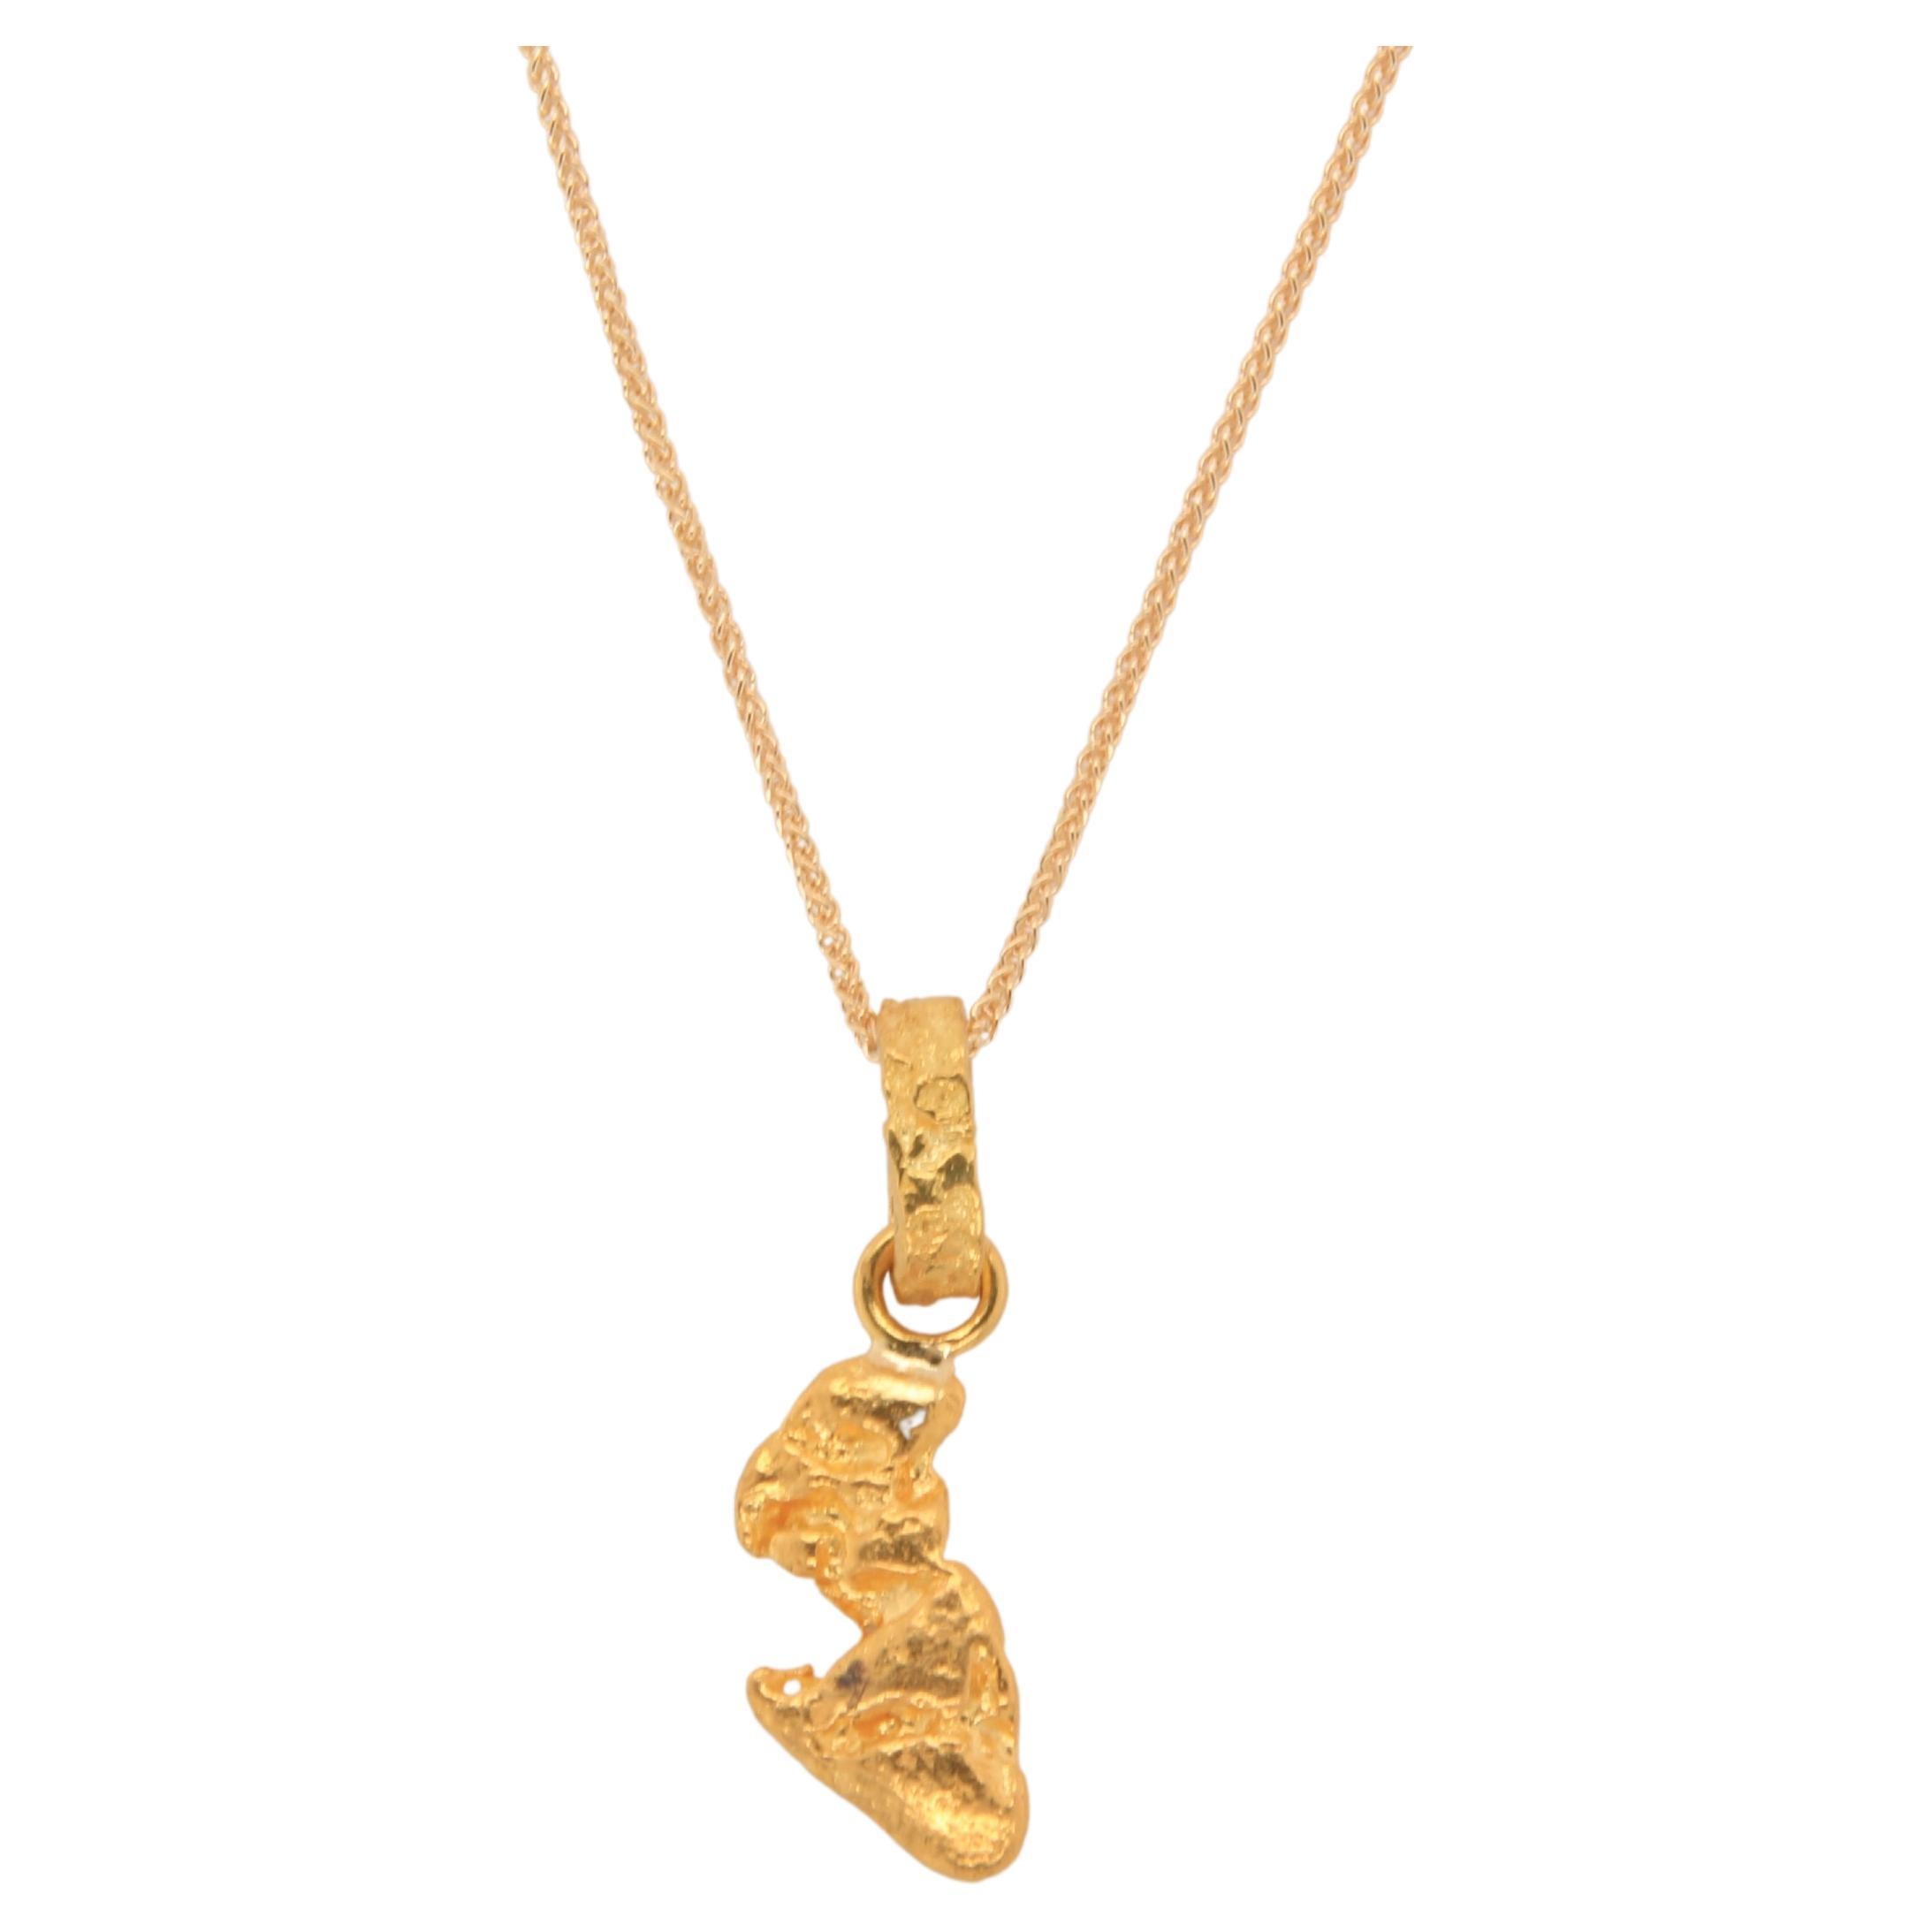 Women's or Men's Raw, Solid, 24k Yellow Golden Nugget Pendant, 4.2 Grams from Australia For Sale